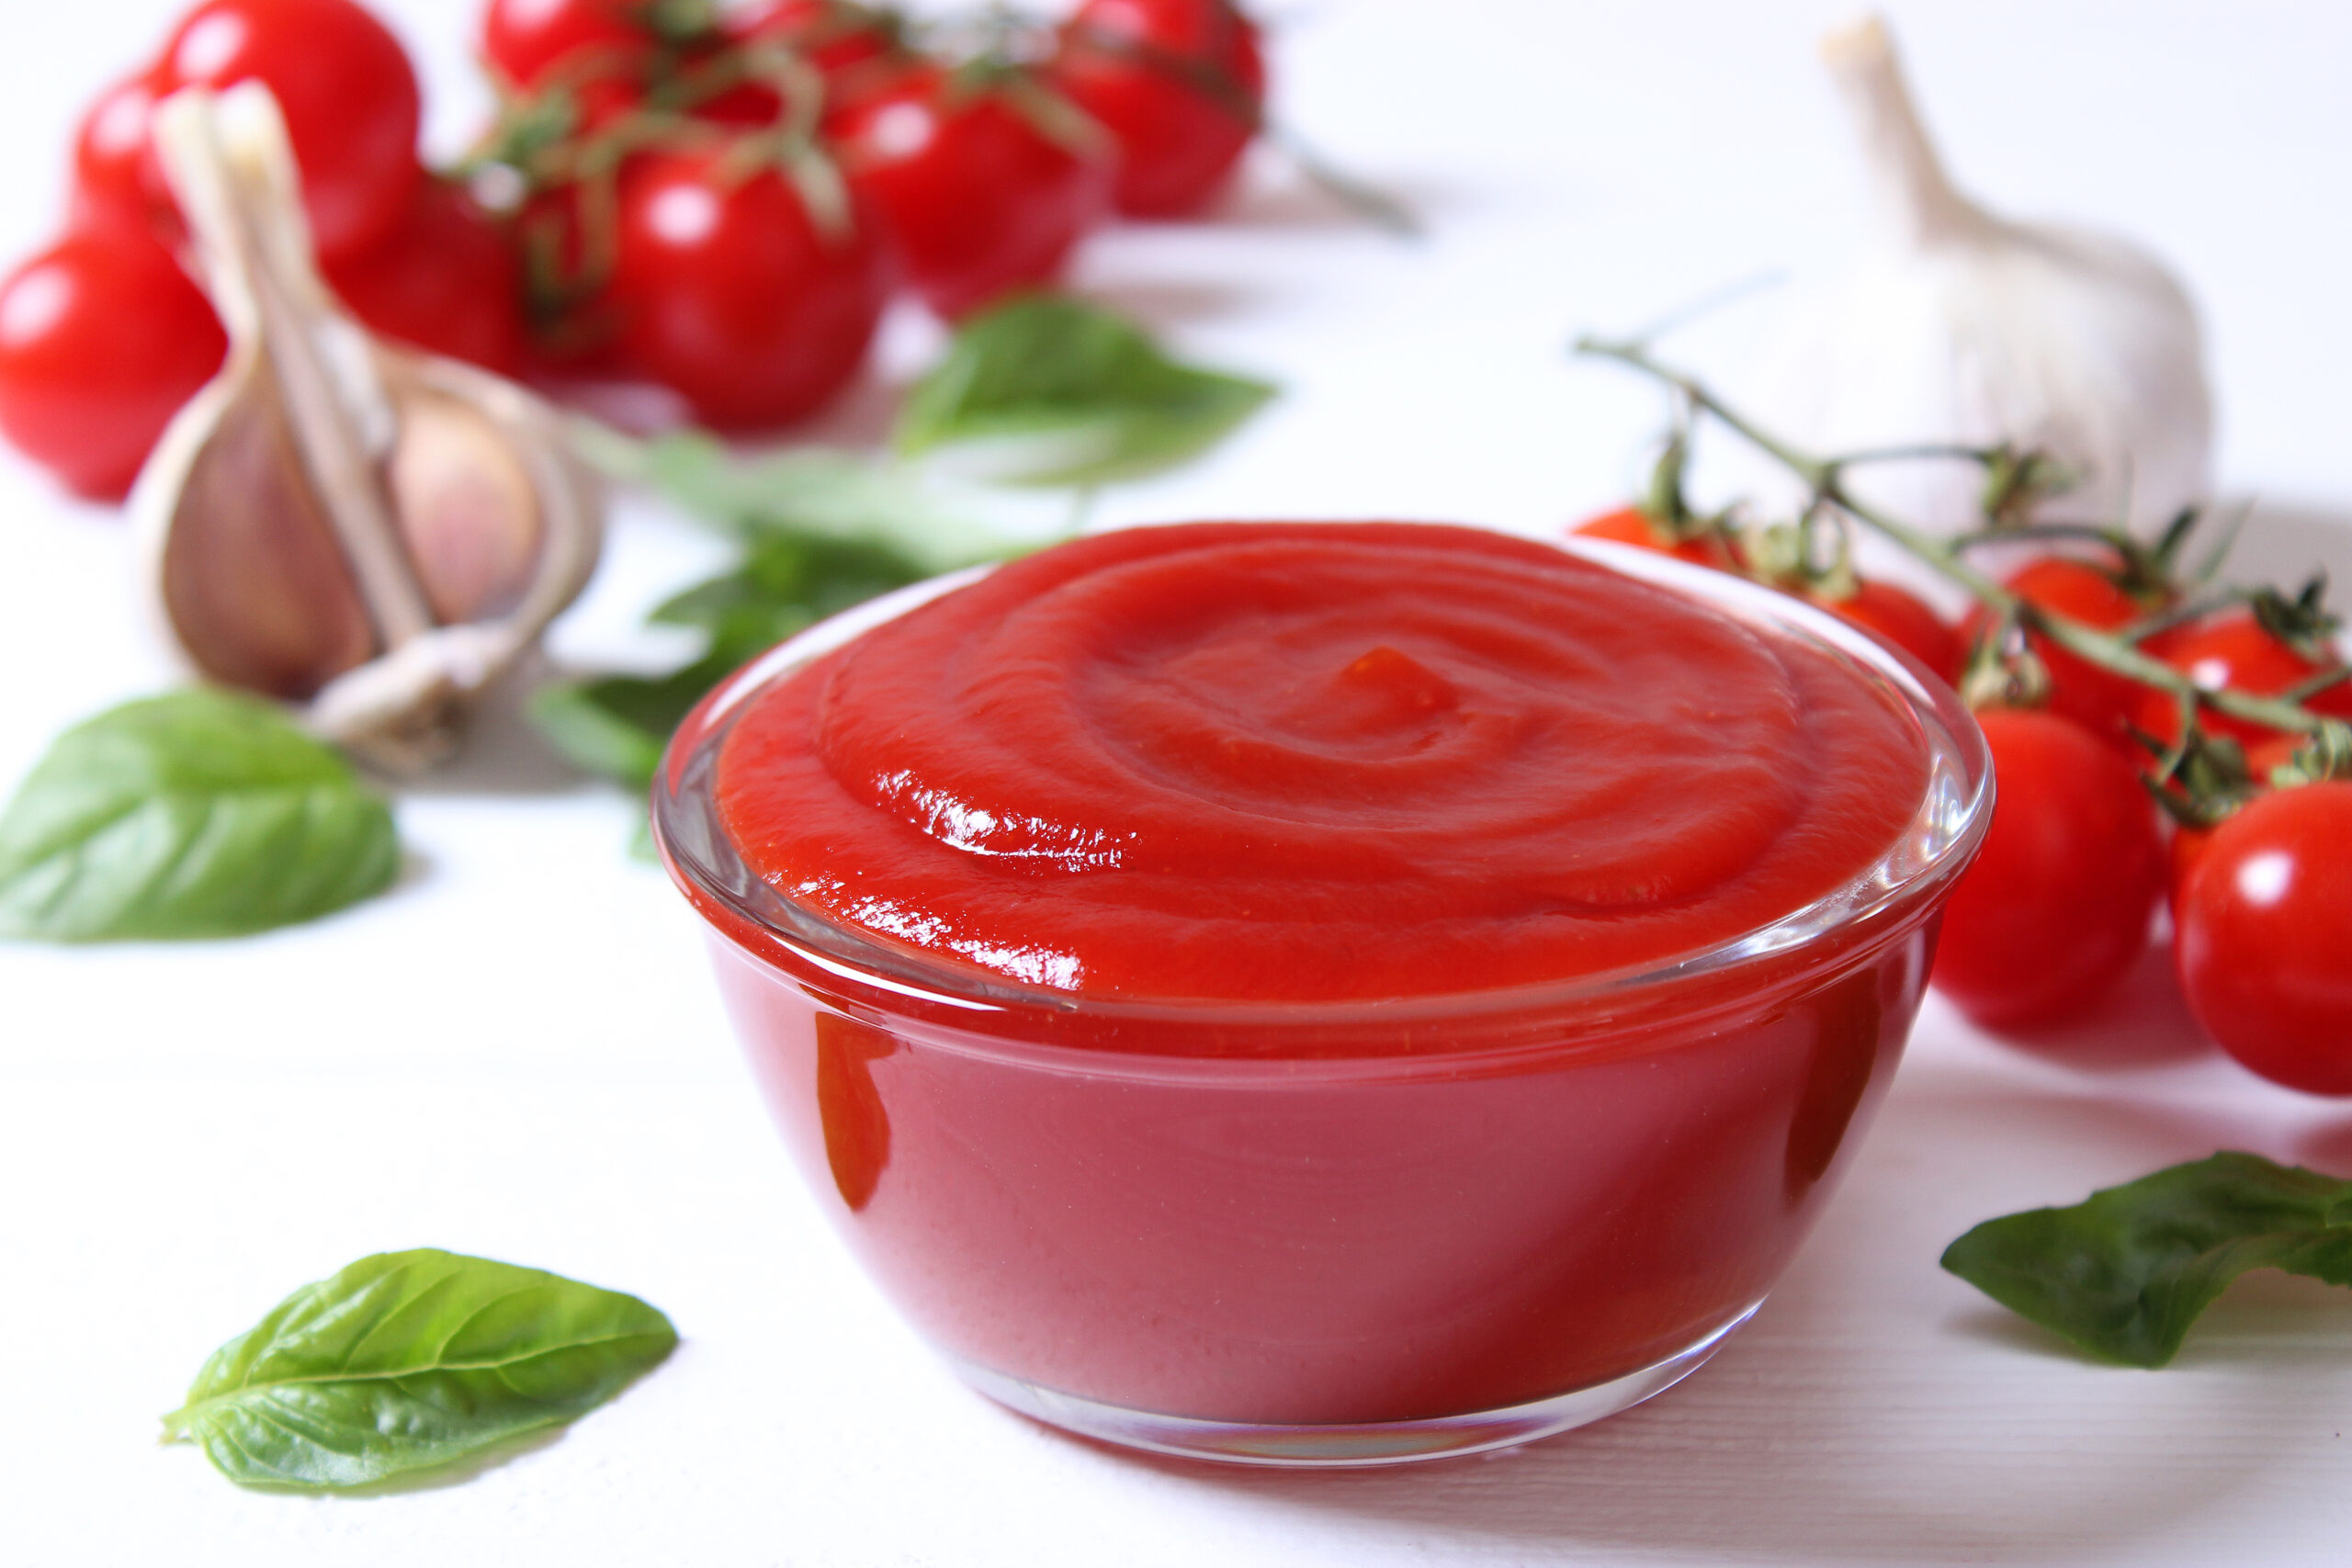 Substitute Tomato Paste for Ketchup